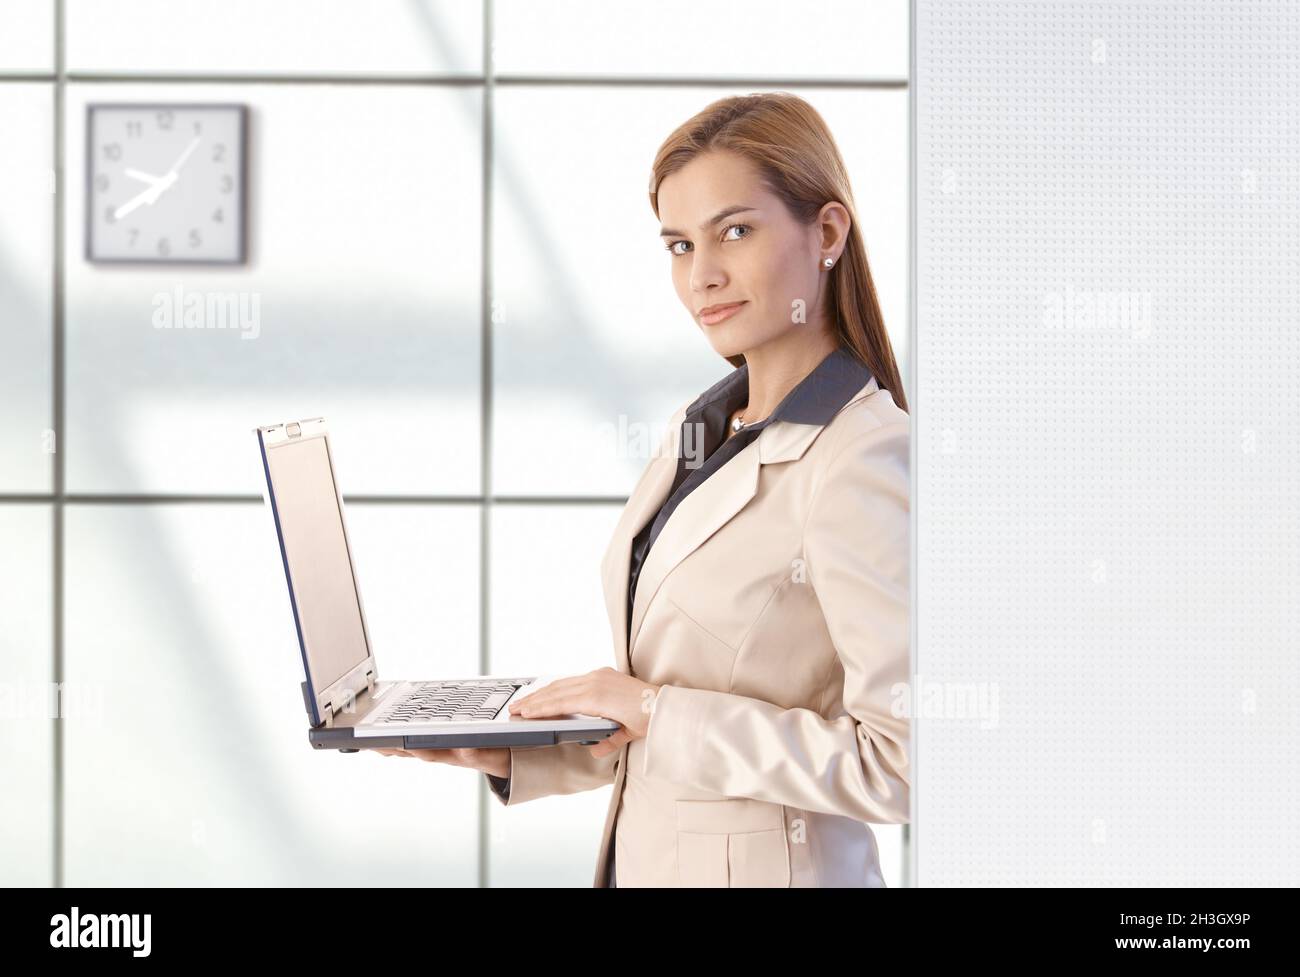 Attractive businesswoman using laptop smiling Stock Photo